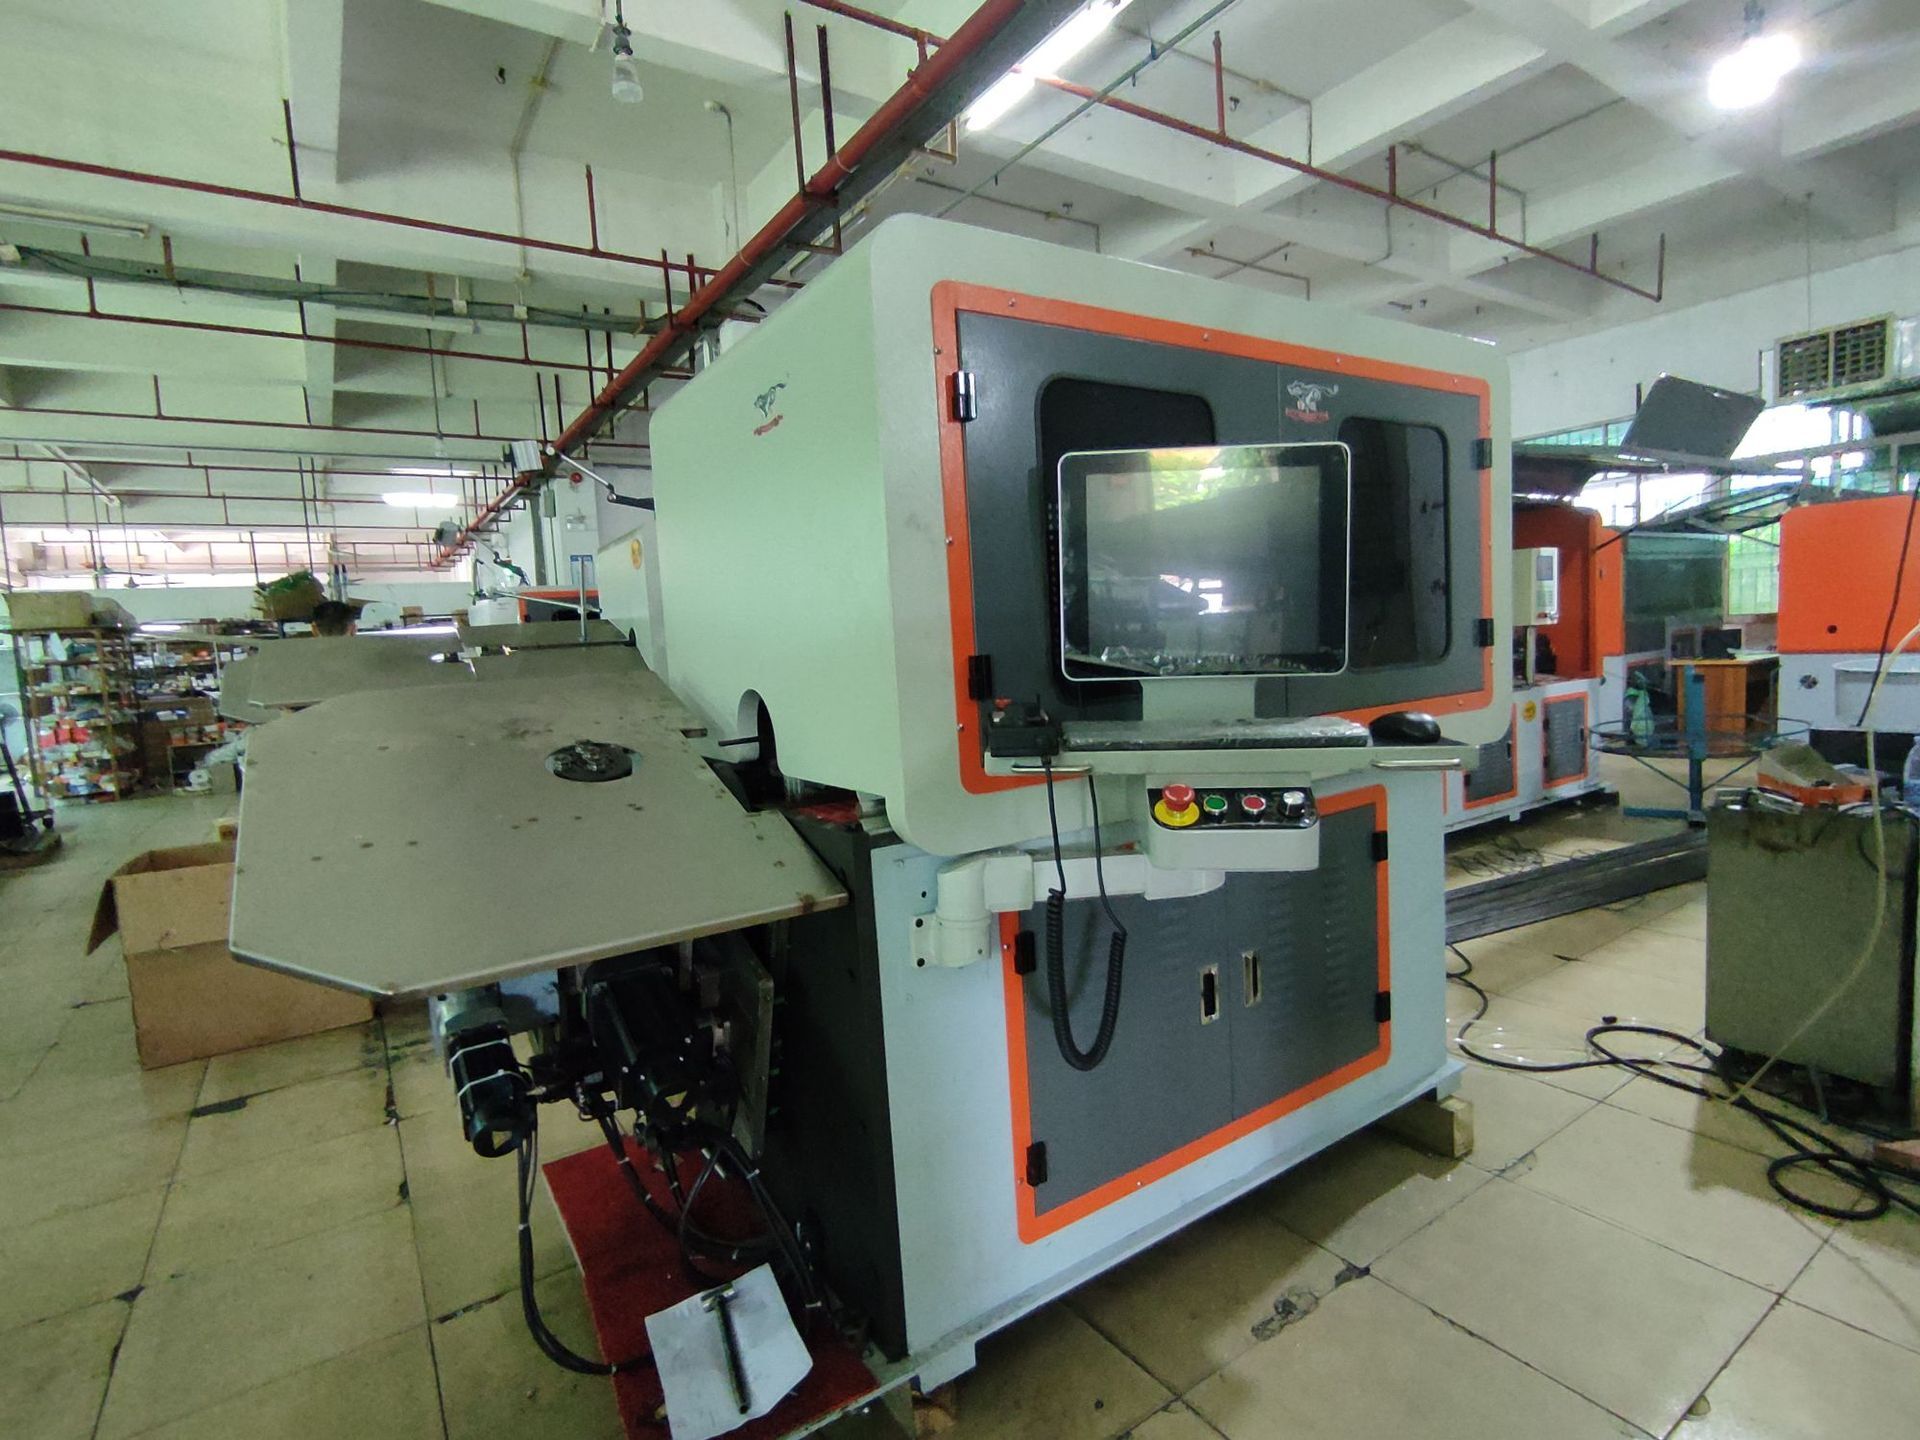 Factory supply discount price 3d wire bending machine   